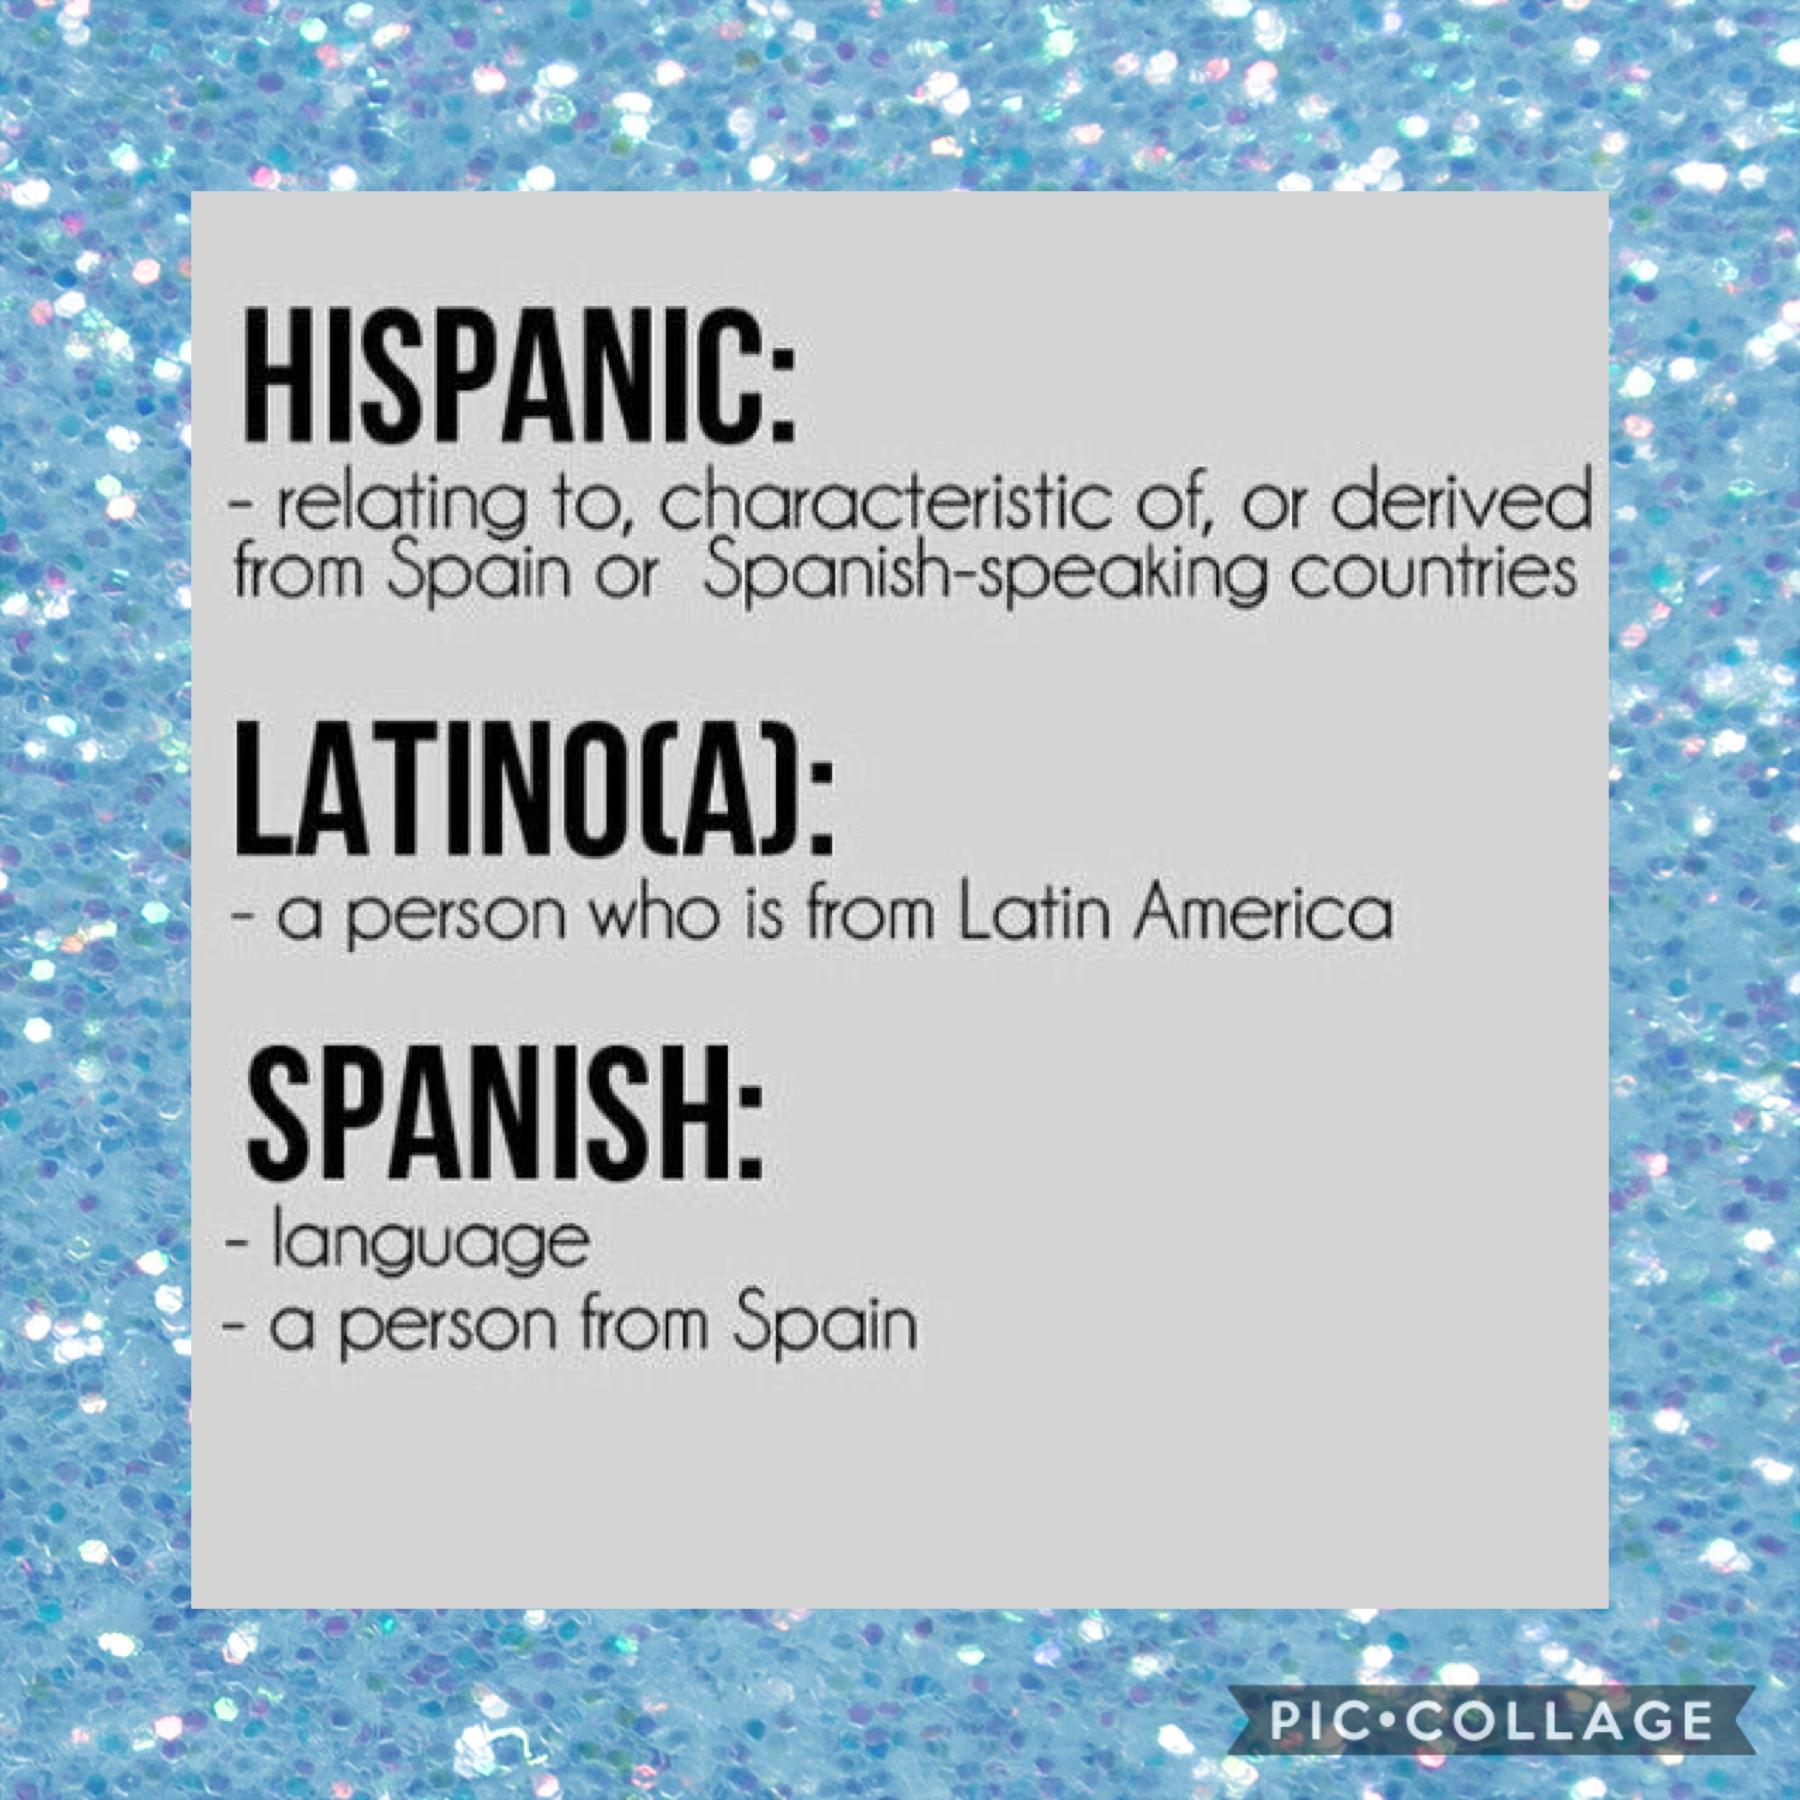 some important concepts to clarify on 💕🙏🏽 latino is not a race, it is an ethnicity 😌 buenos días from your euro-asian latina friend 😂🙆🏻‍♀️ if you ever have any specific questions on Spanish or cosas latinas, do let me know! 😍🥰